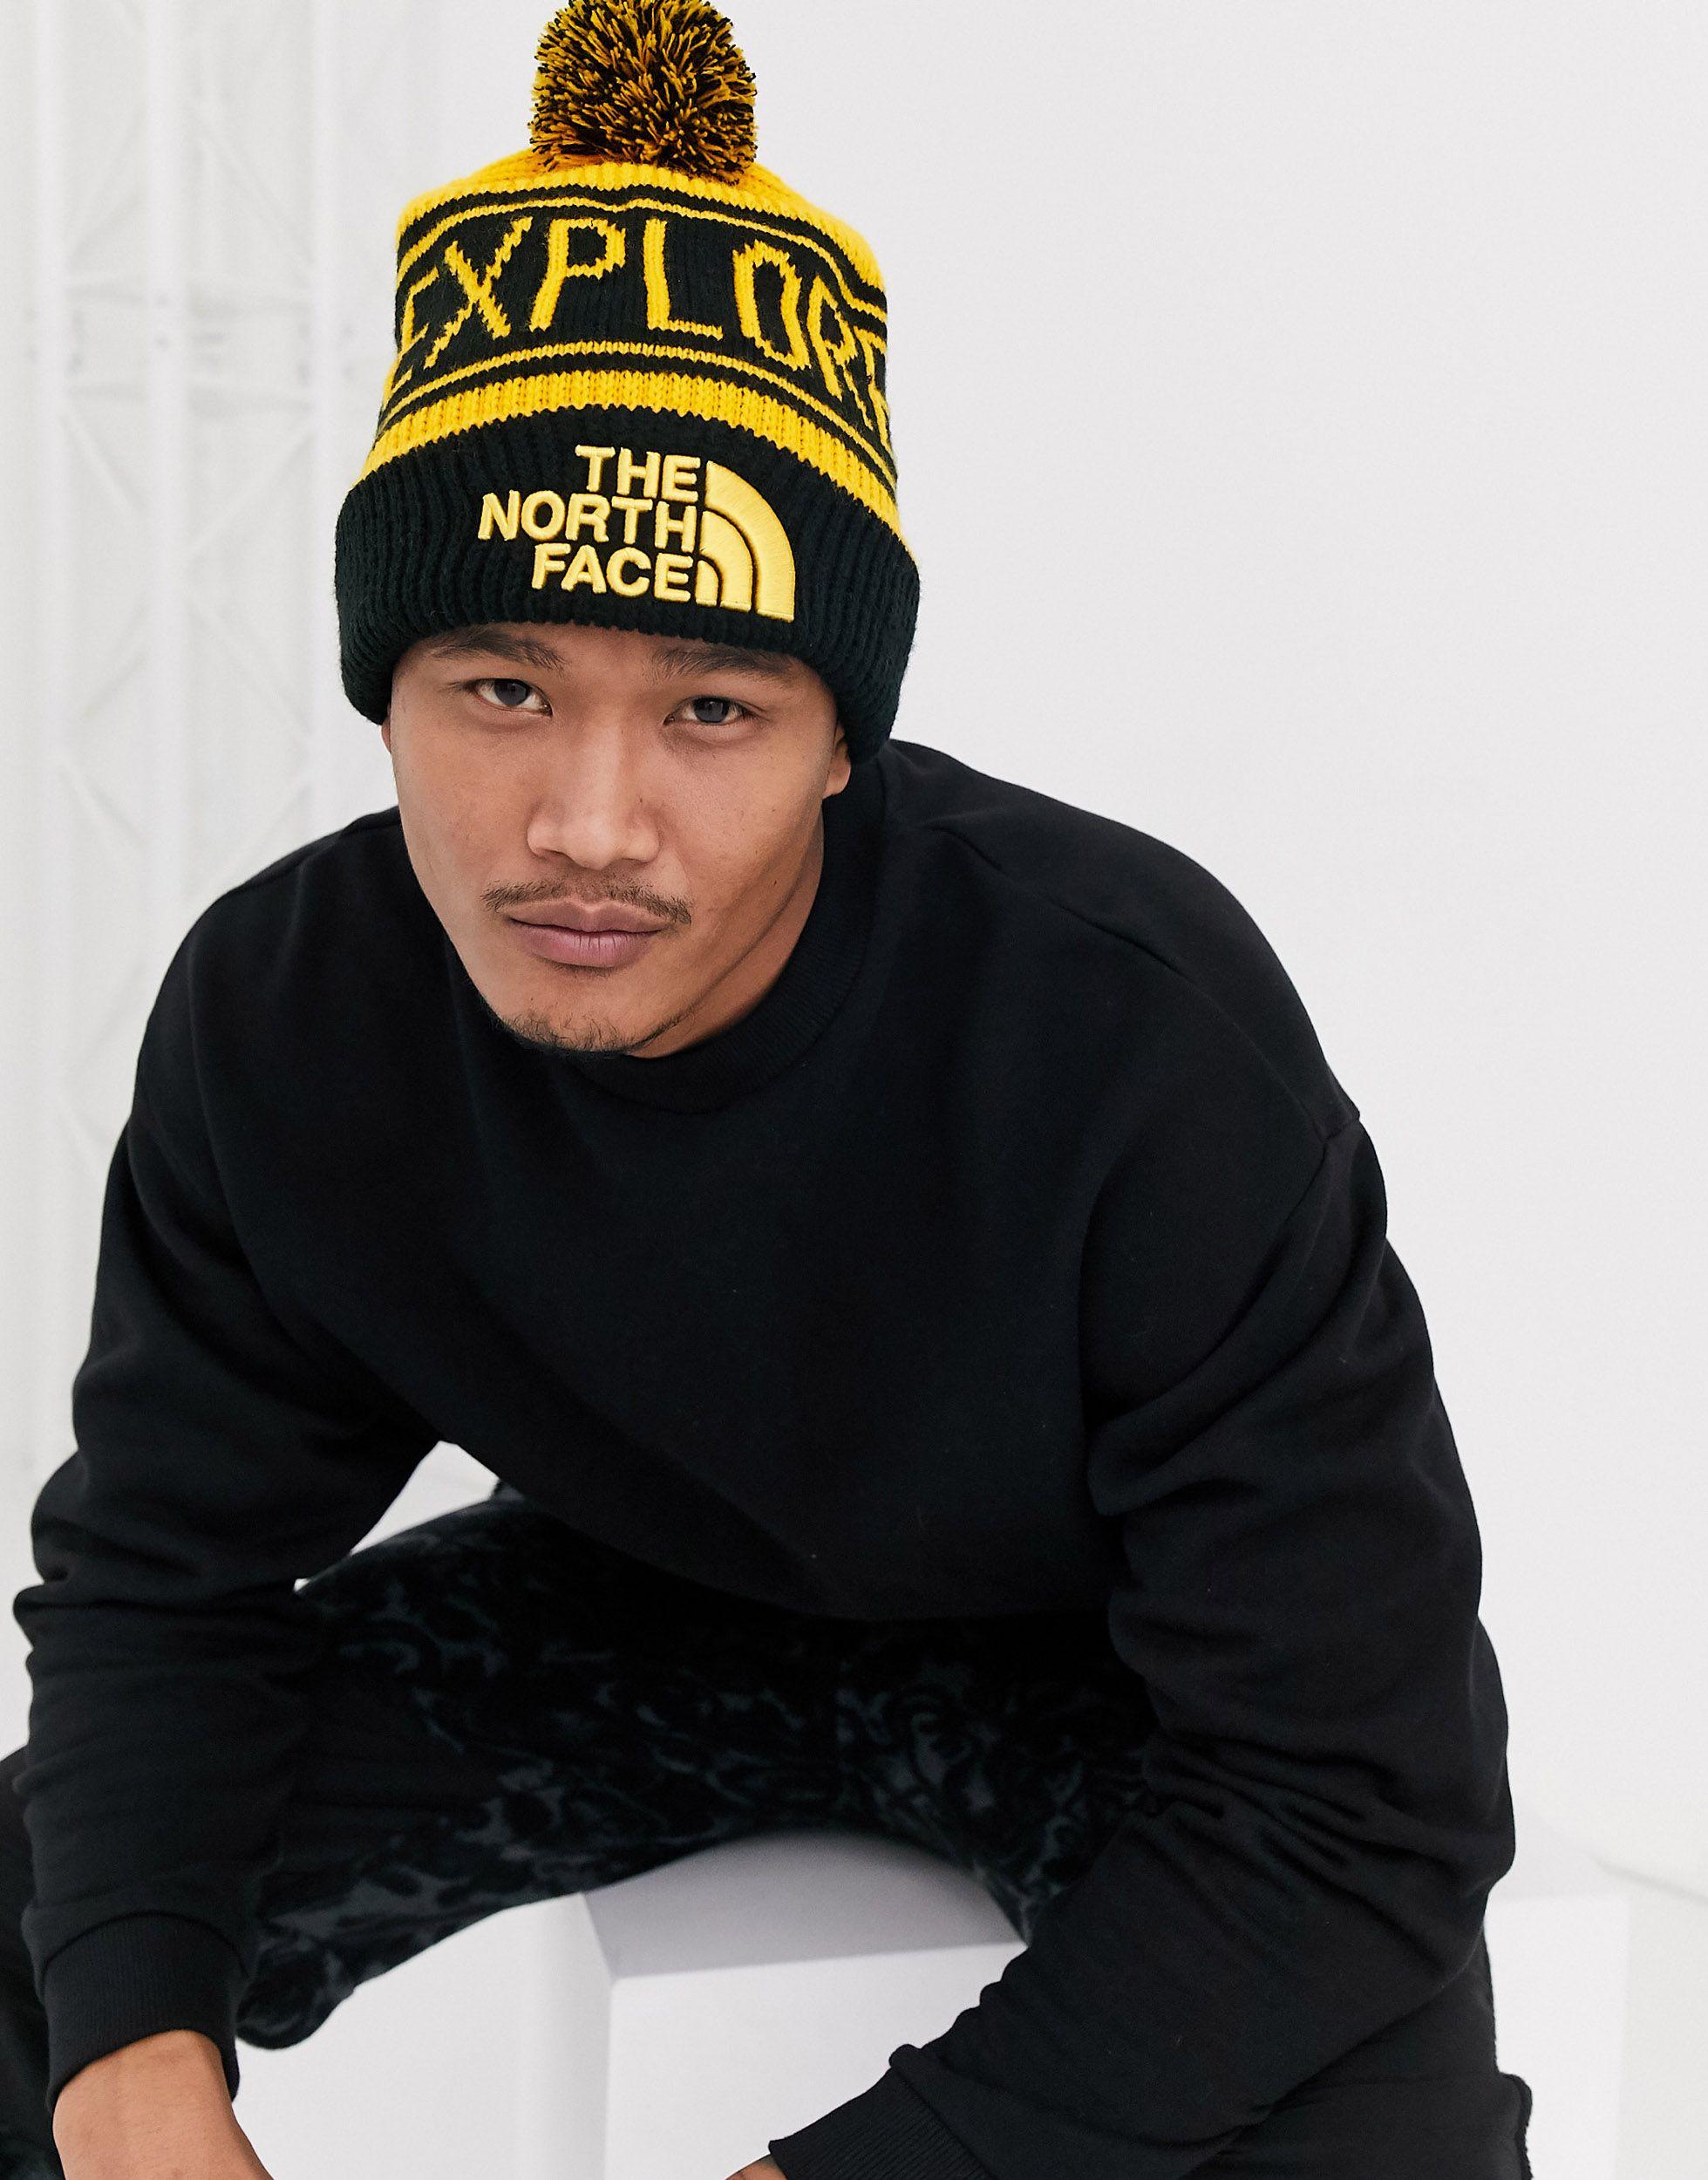 The North Face S Retro Tnf Pom Beanie Yellow/black One Size for Men | Lyst